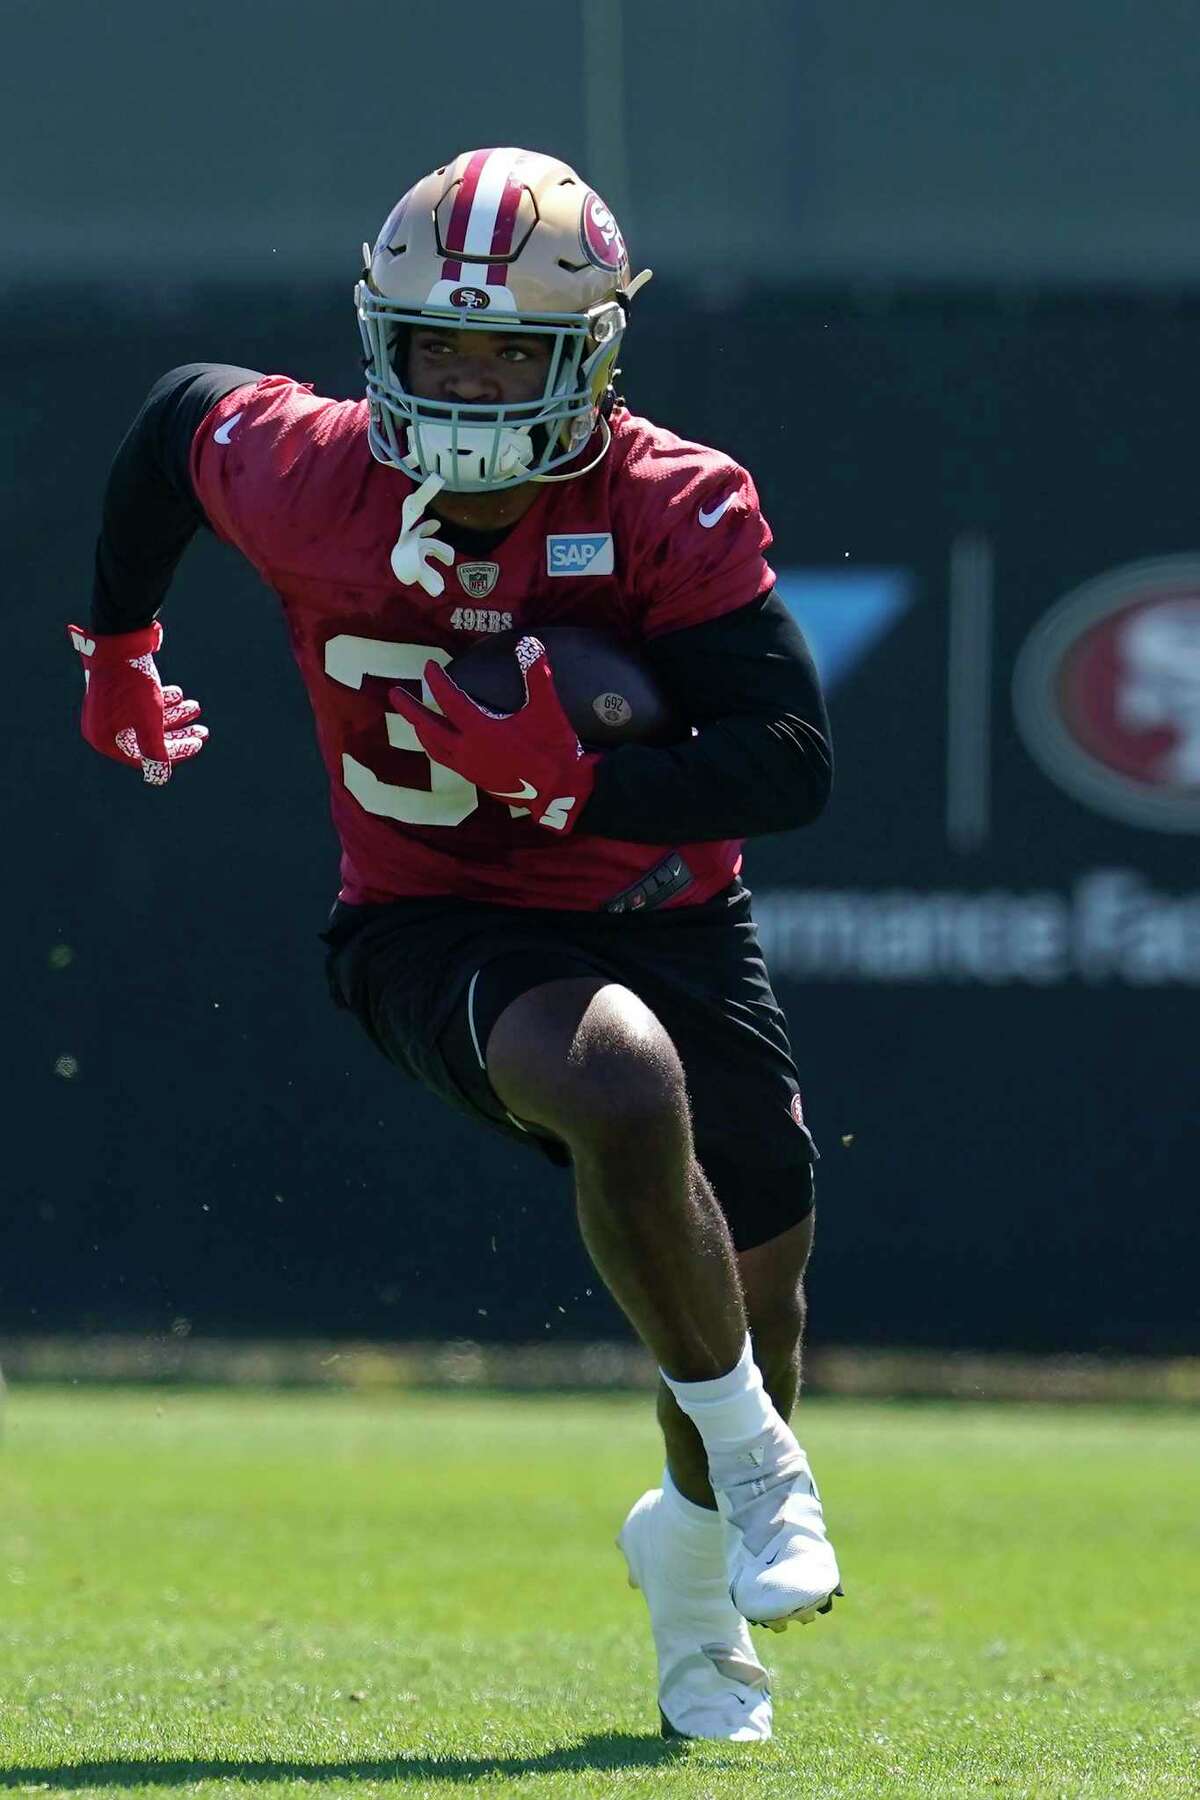 San Francisco 49ers' Ty Davis-Price takes part in drills at the NFL football team's practice facility in Santa Clara, Calif., Thursday, Sept. 1, 2022. (AP Photo/Jeff Chiu)